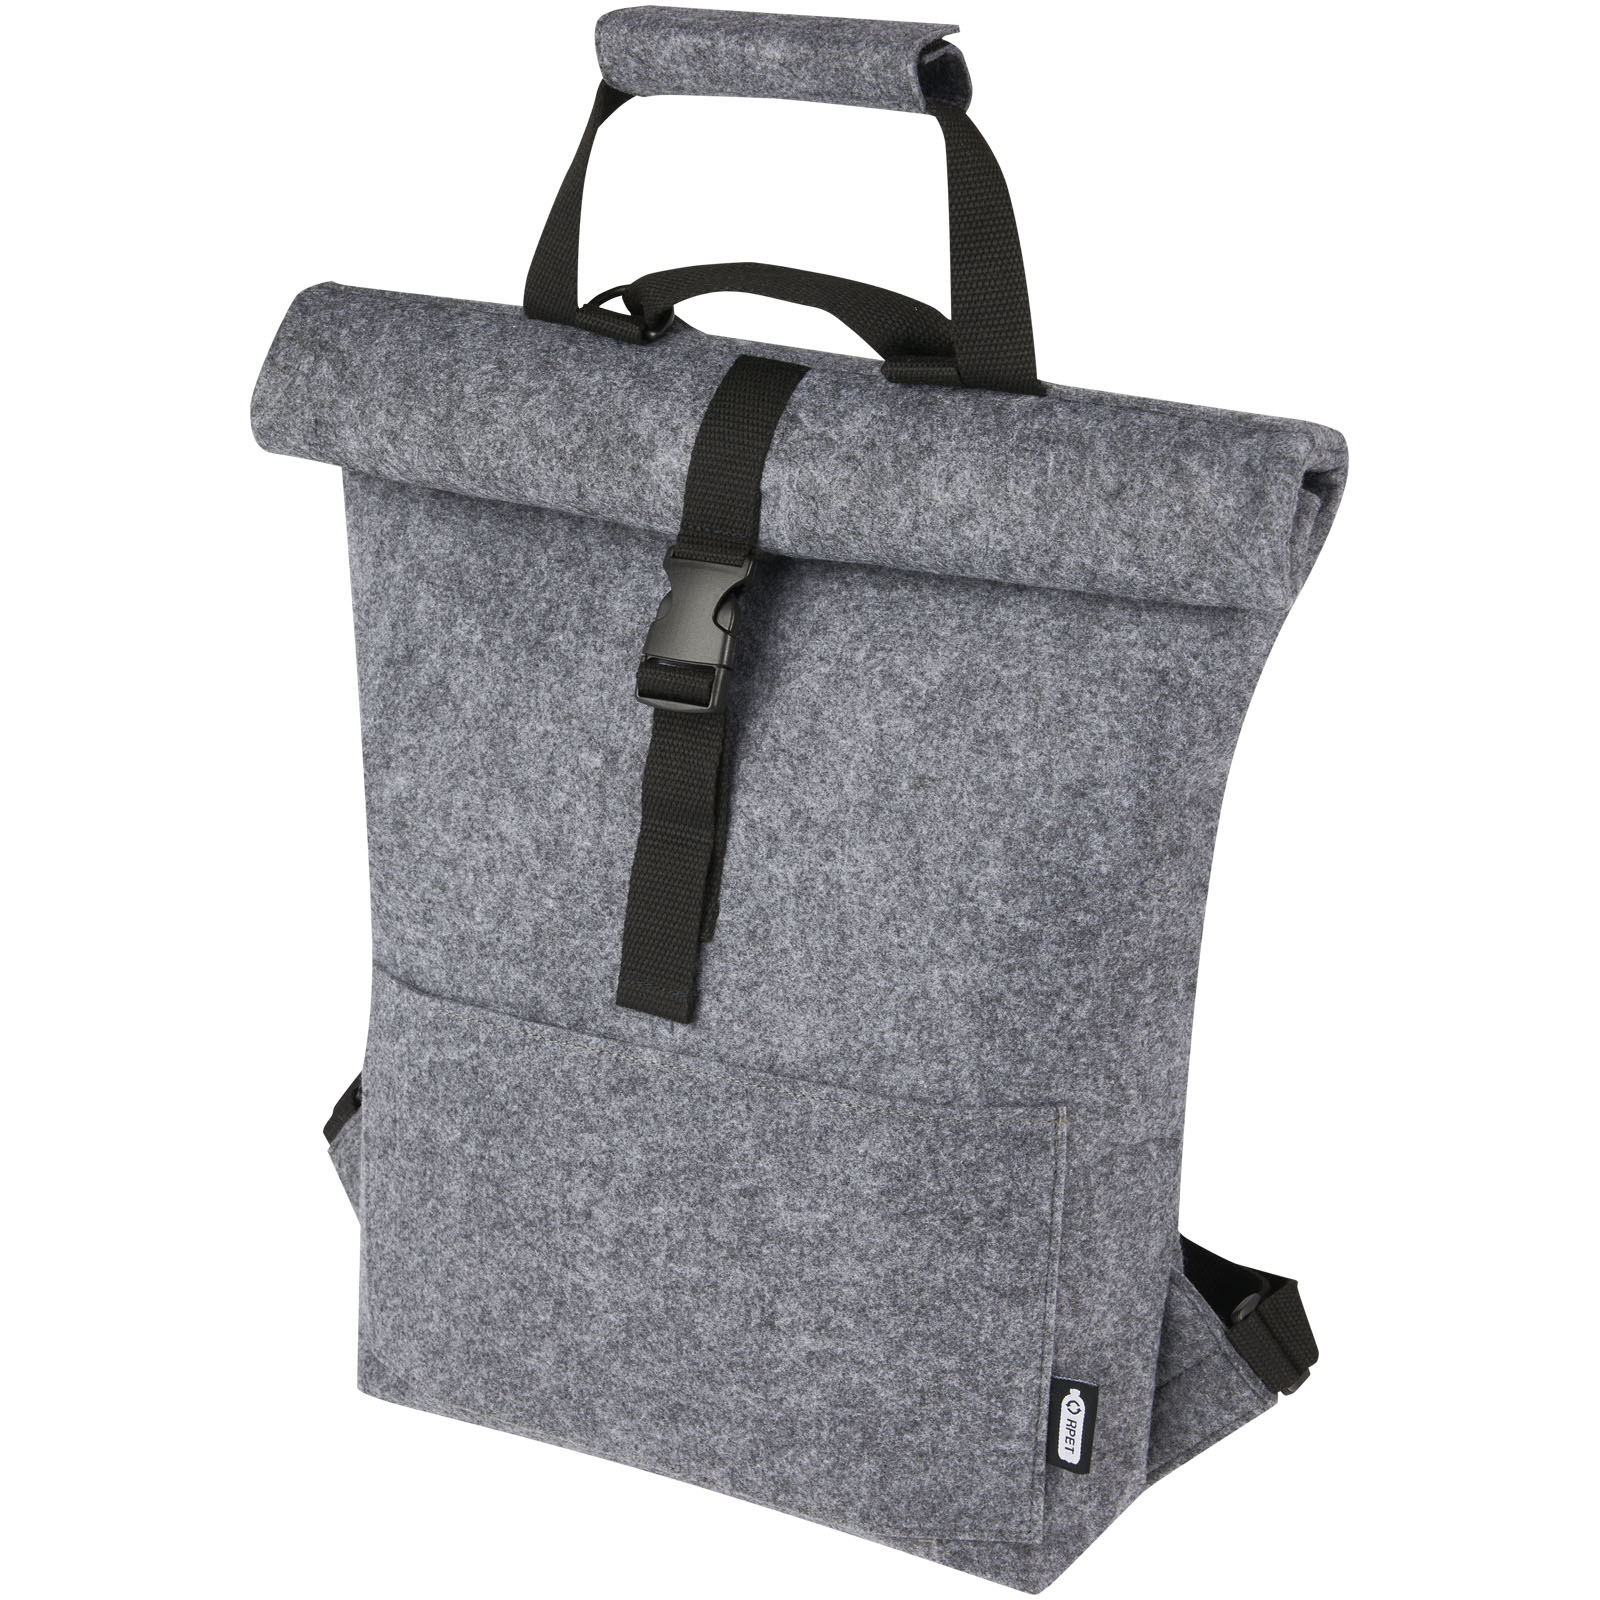 Felt rolling bike bag MOLE made of recycled material, 13 l - grey